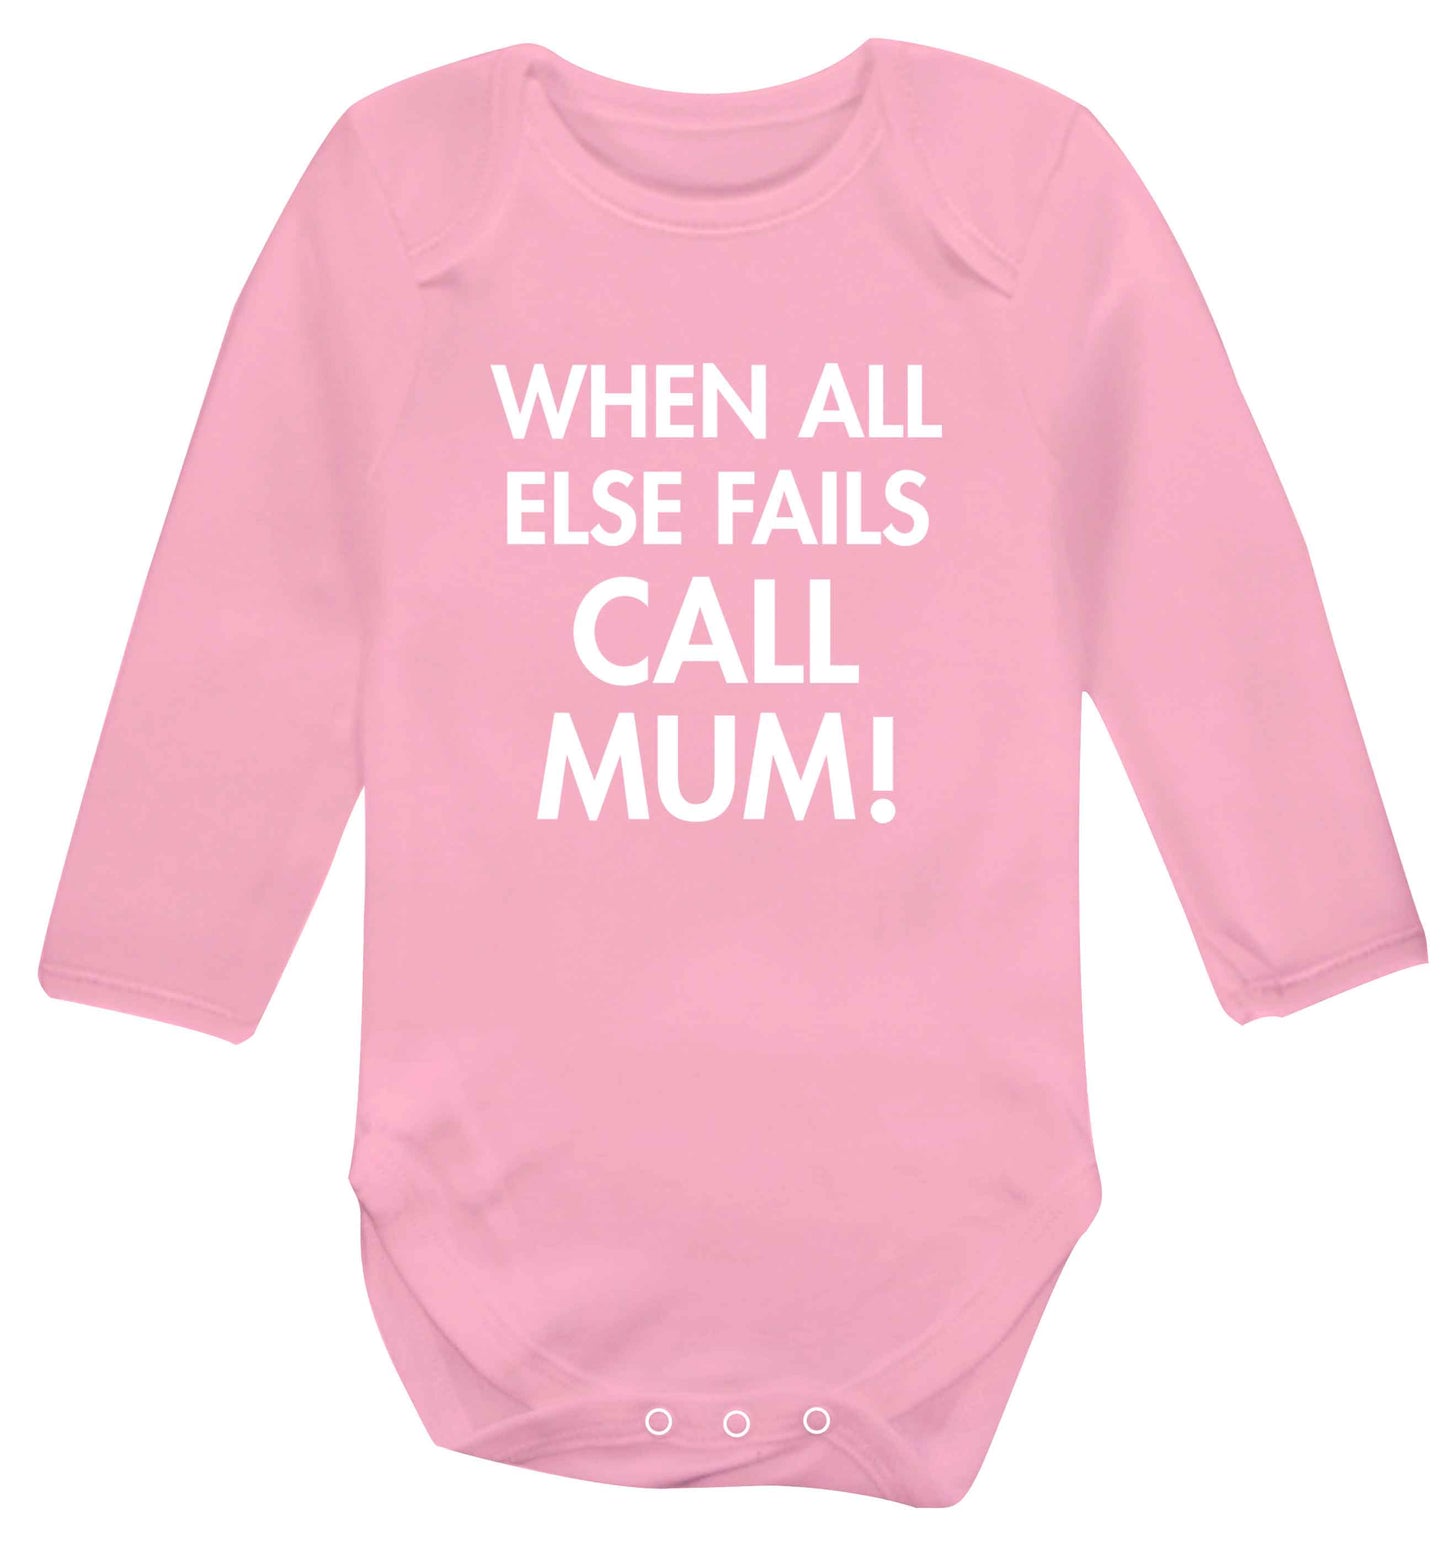 When all else fails call mum! baby vest long sleeved pale pink 6-12 months